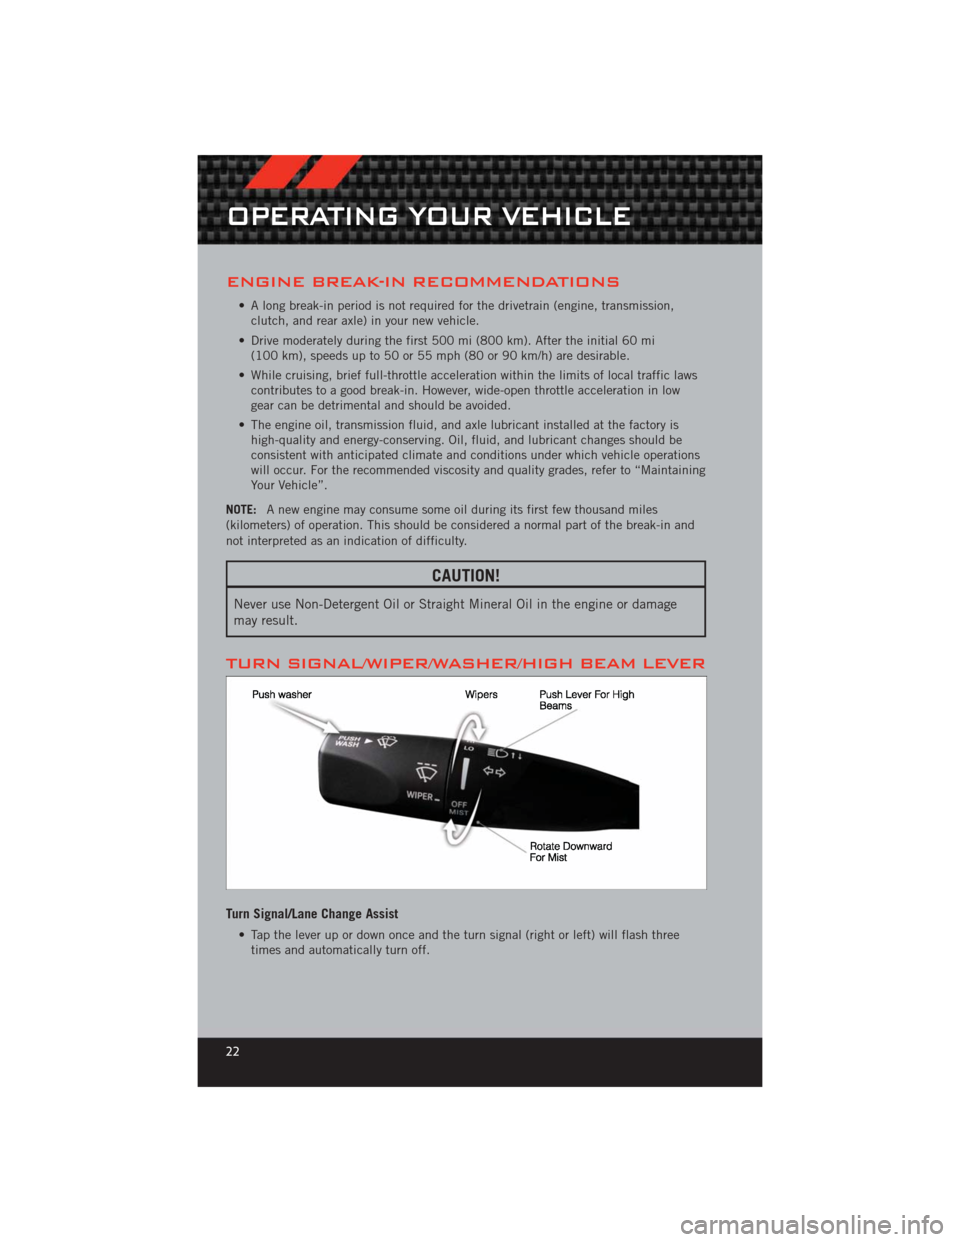 DODGE CHALLENGER 2012 3.G User Guide ENGINE BREAK-IN RECOMMENDATIONS
• A long break-in period is not required for the drivetrain (engine, transmission,clutch, and rear axle) in your new vehicle.
• Drive moderately during the first 50